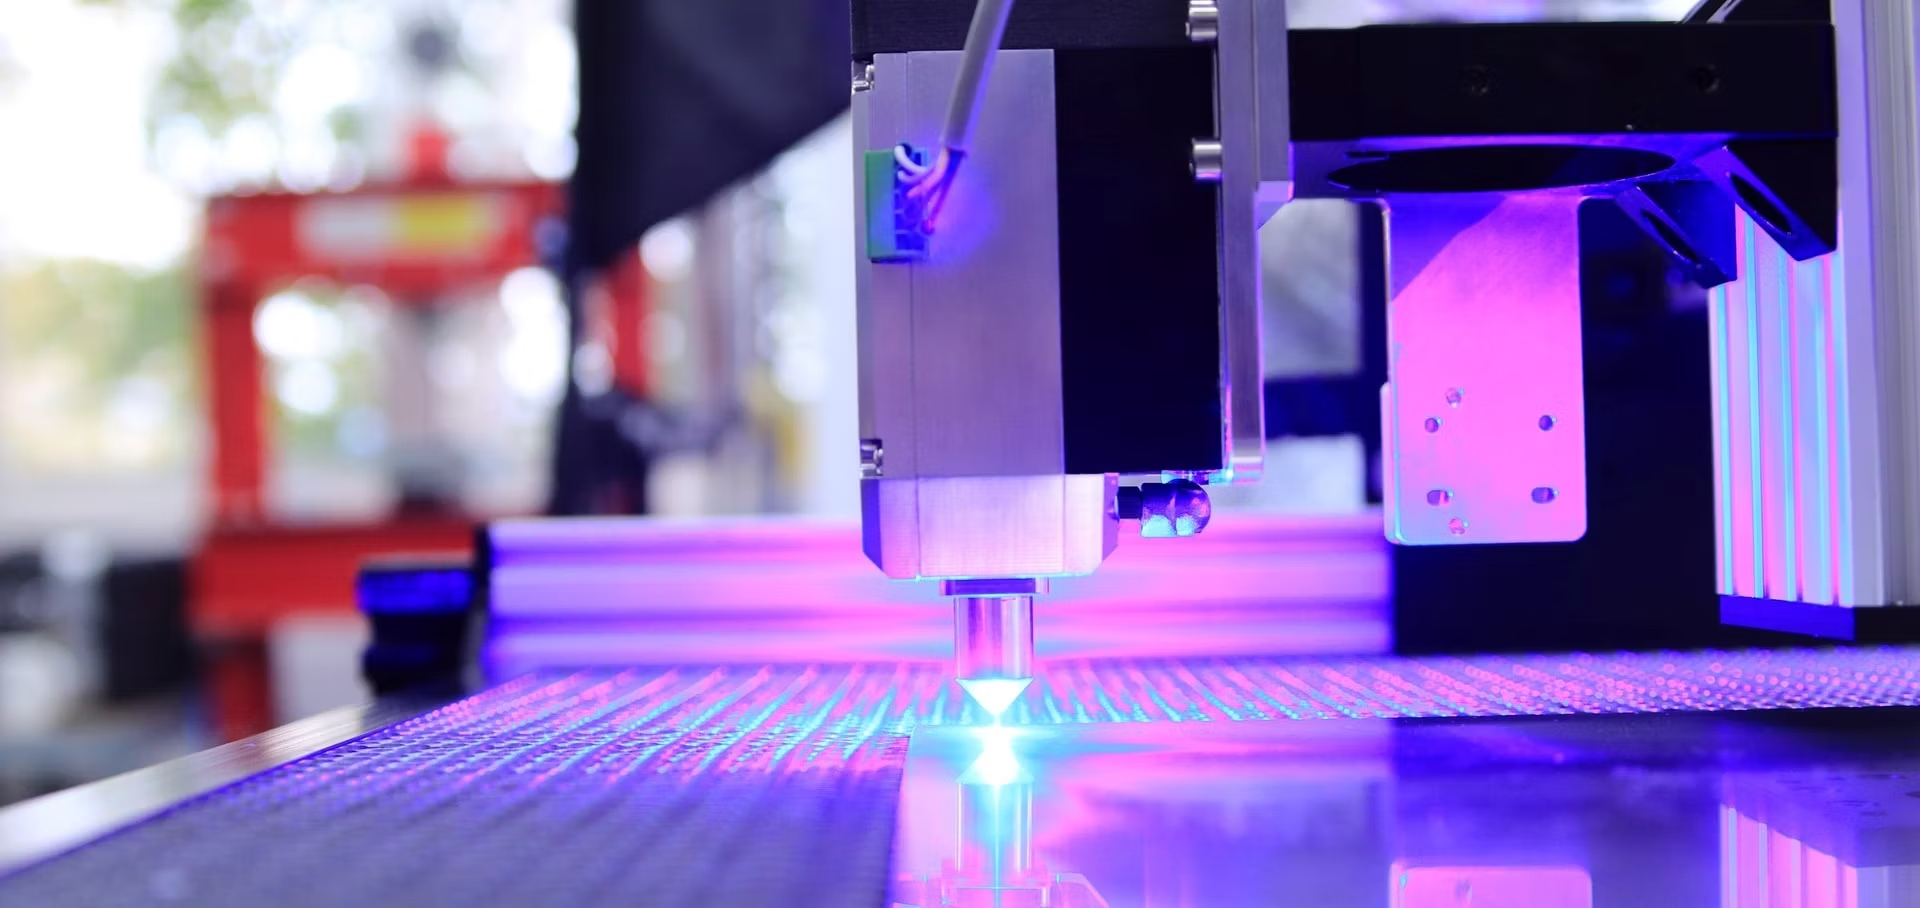 3d-printing-machine-with-purple-and-white-led-lights